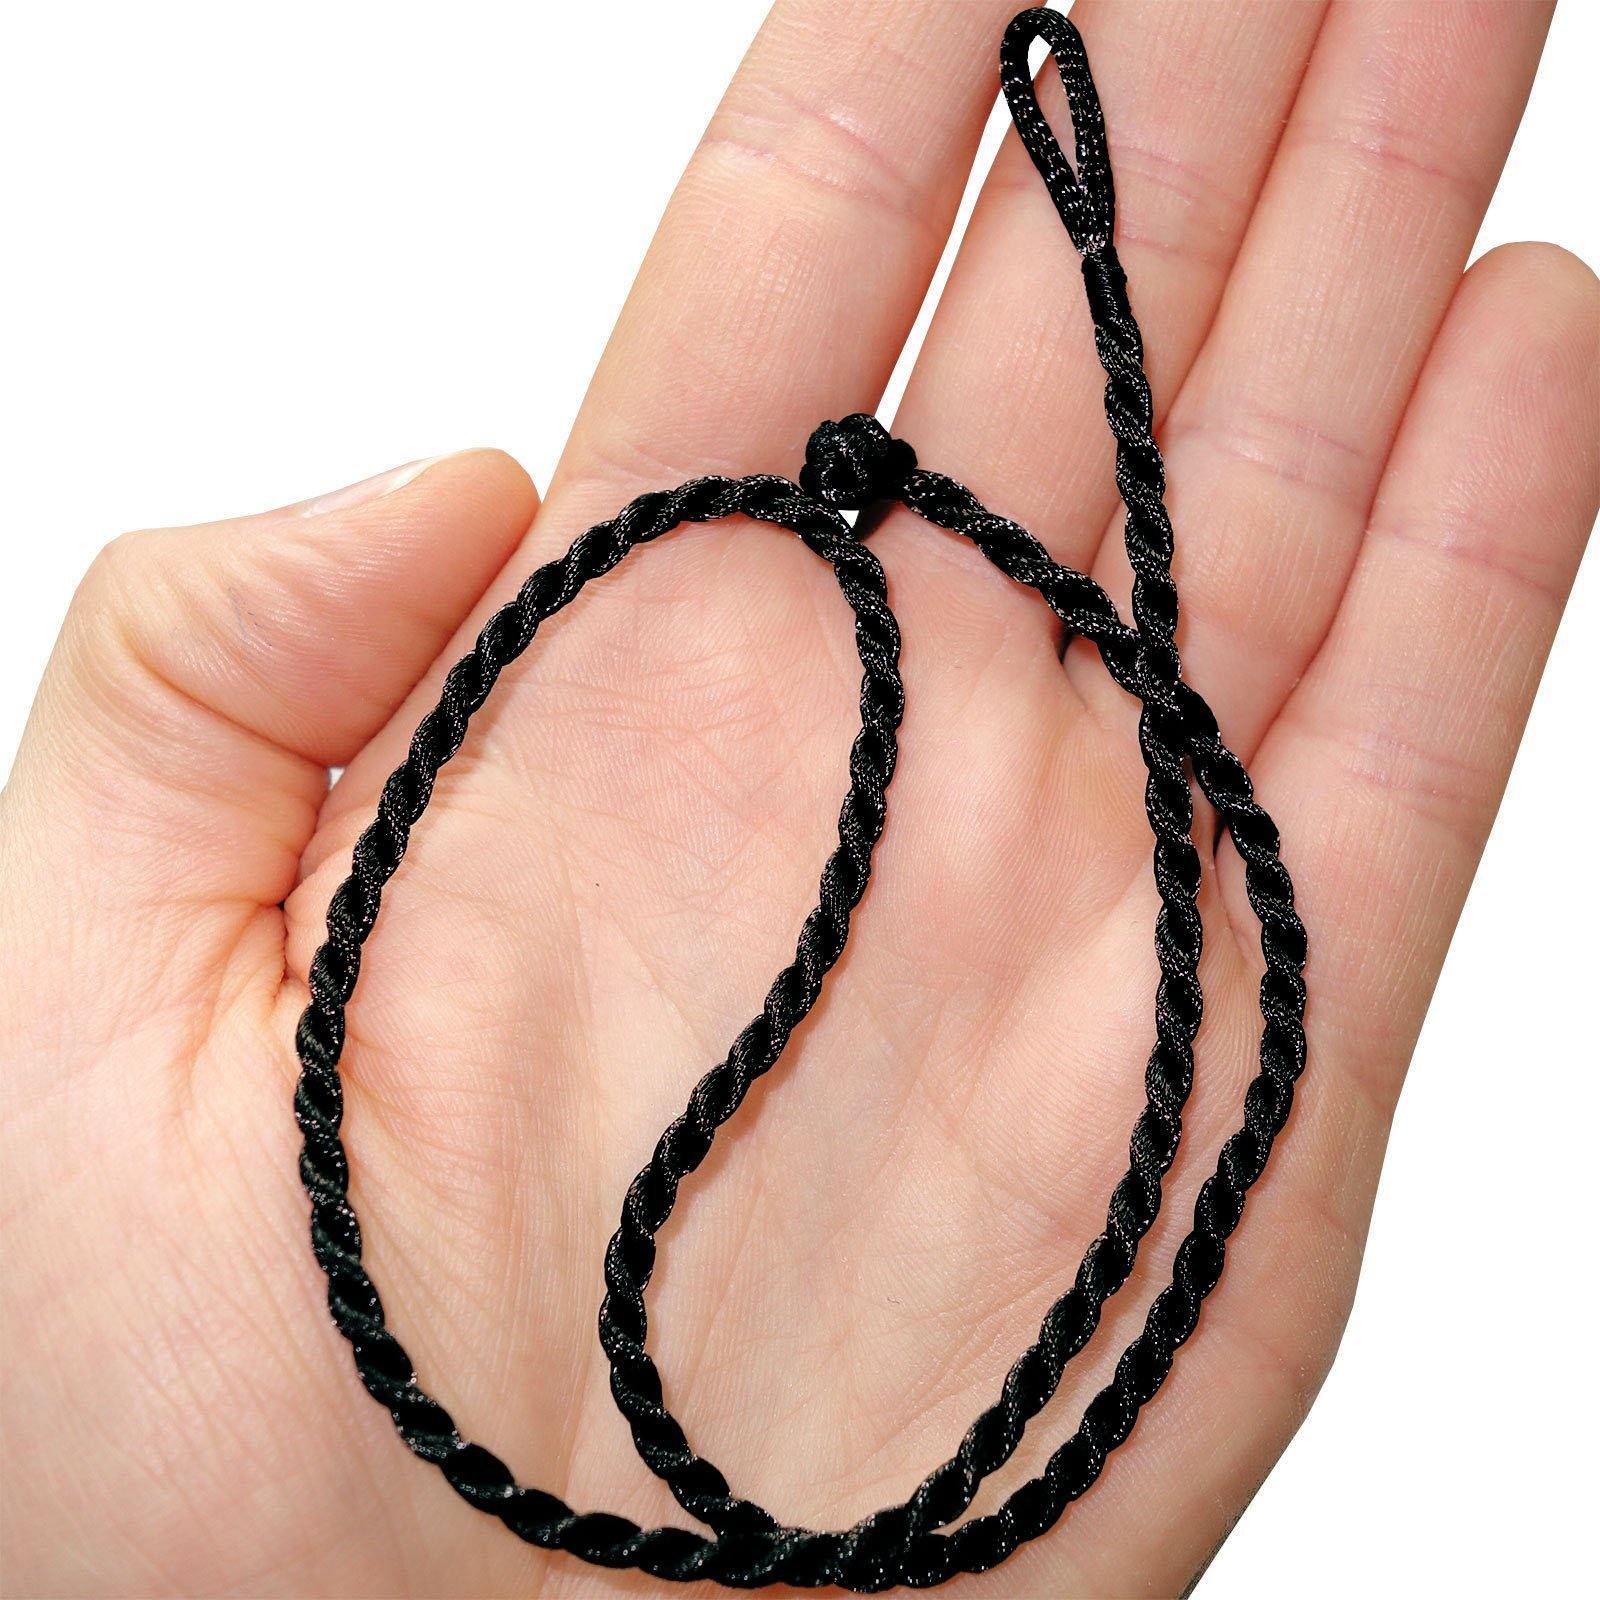 Classic Men's Leather Necklace Choker Black Brown Braided Rope Necklace for  Men Gifts Wholesale Dropshipping Male Jewelry UNM27 - Price history &  Review | AliExpress Seller - Trendsmax Official Store | Alitools.io